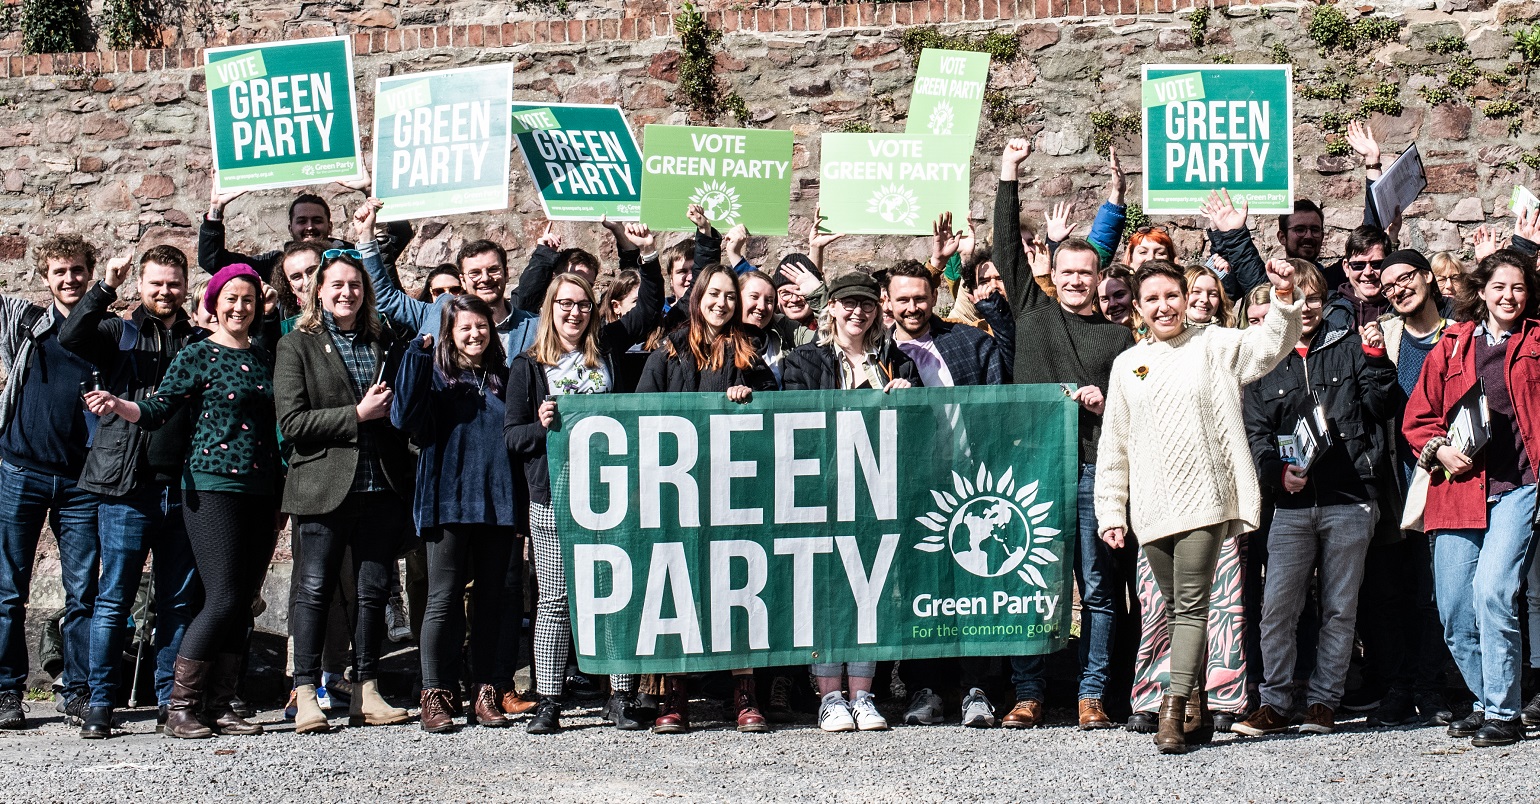 The Green League: Who are the Greens with the biggest social media following? – November 2022